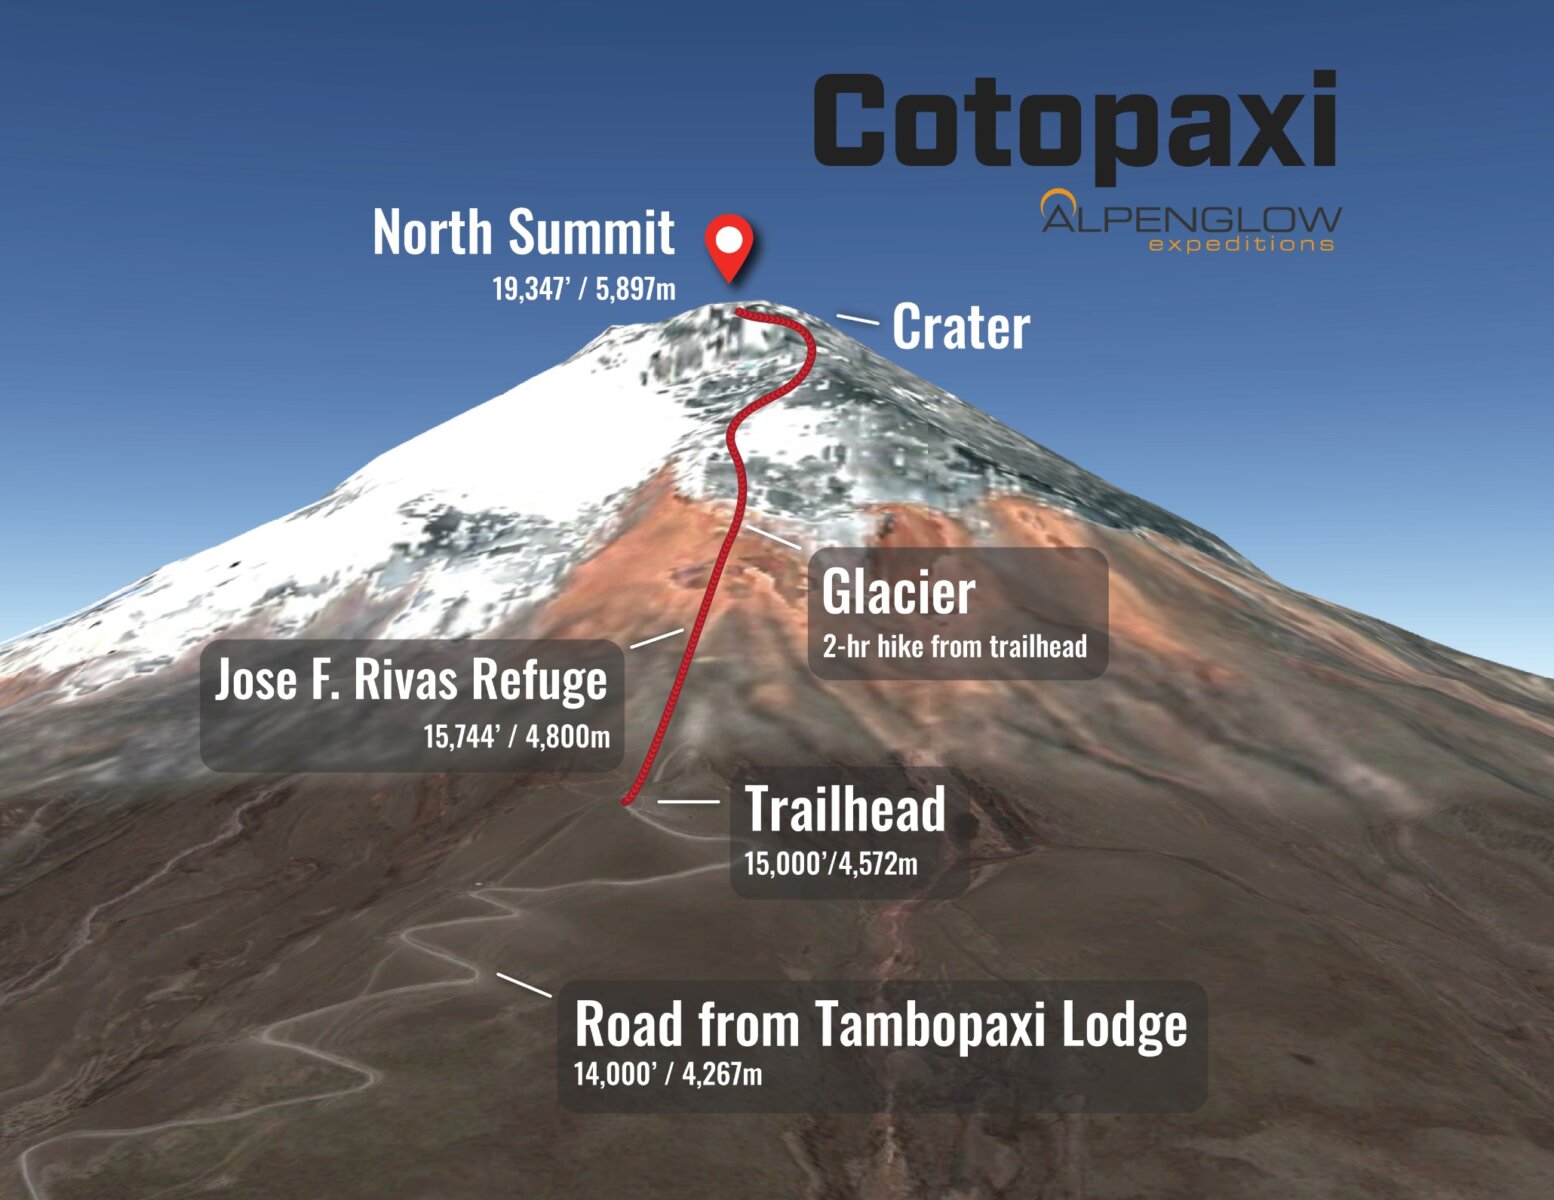 A map showing the route for climbing Cotopaxi.